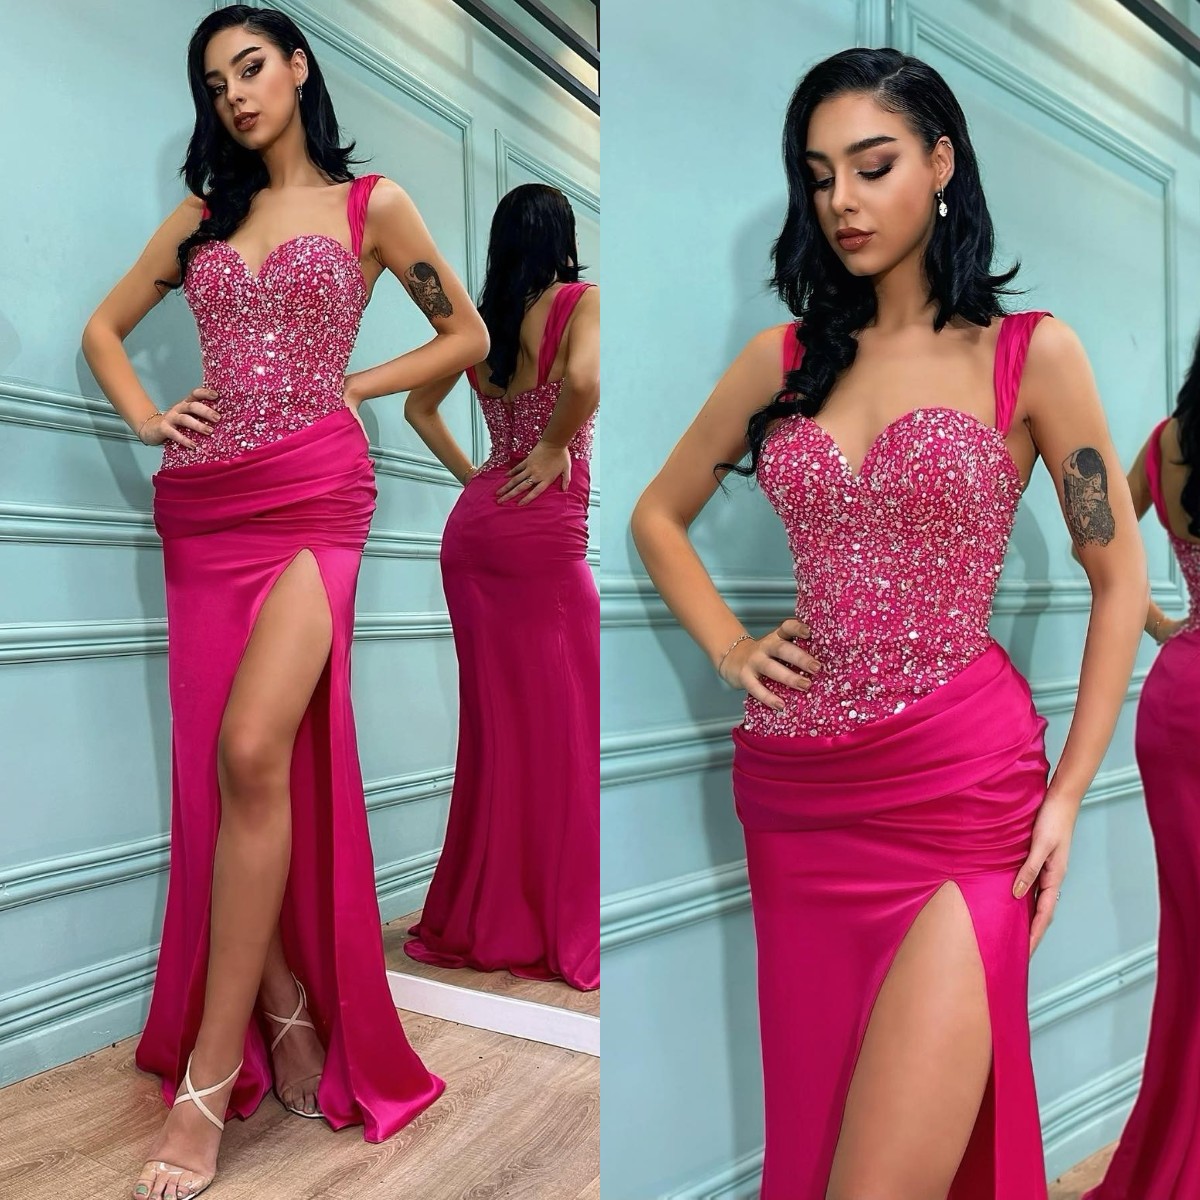 

Sexy Rosy Pink Prom Dresses Sequins Top Straps Evening Gowns Slit Semi Formal Red Carpet Long Special Occasion dress, Customize